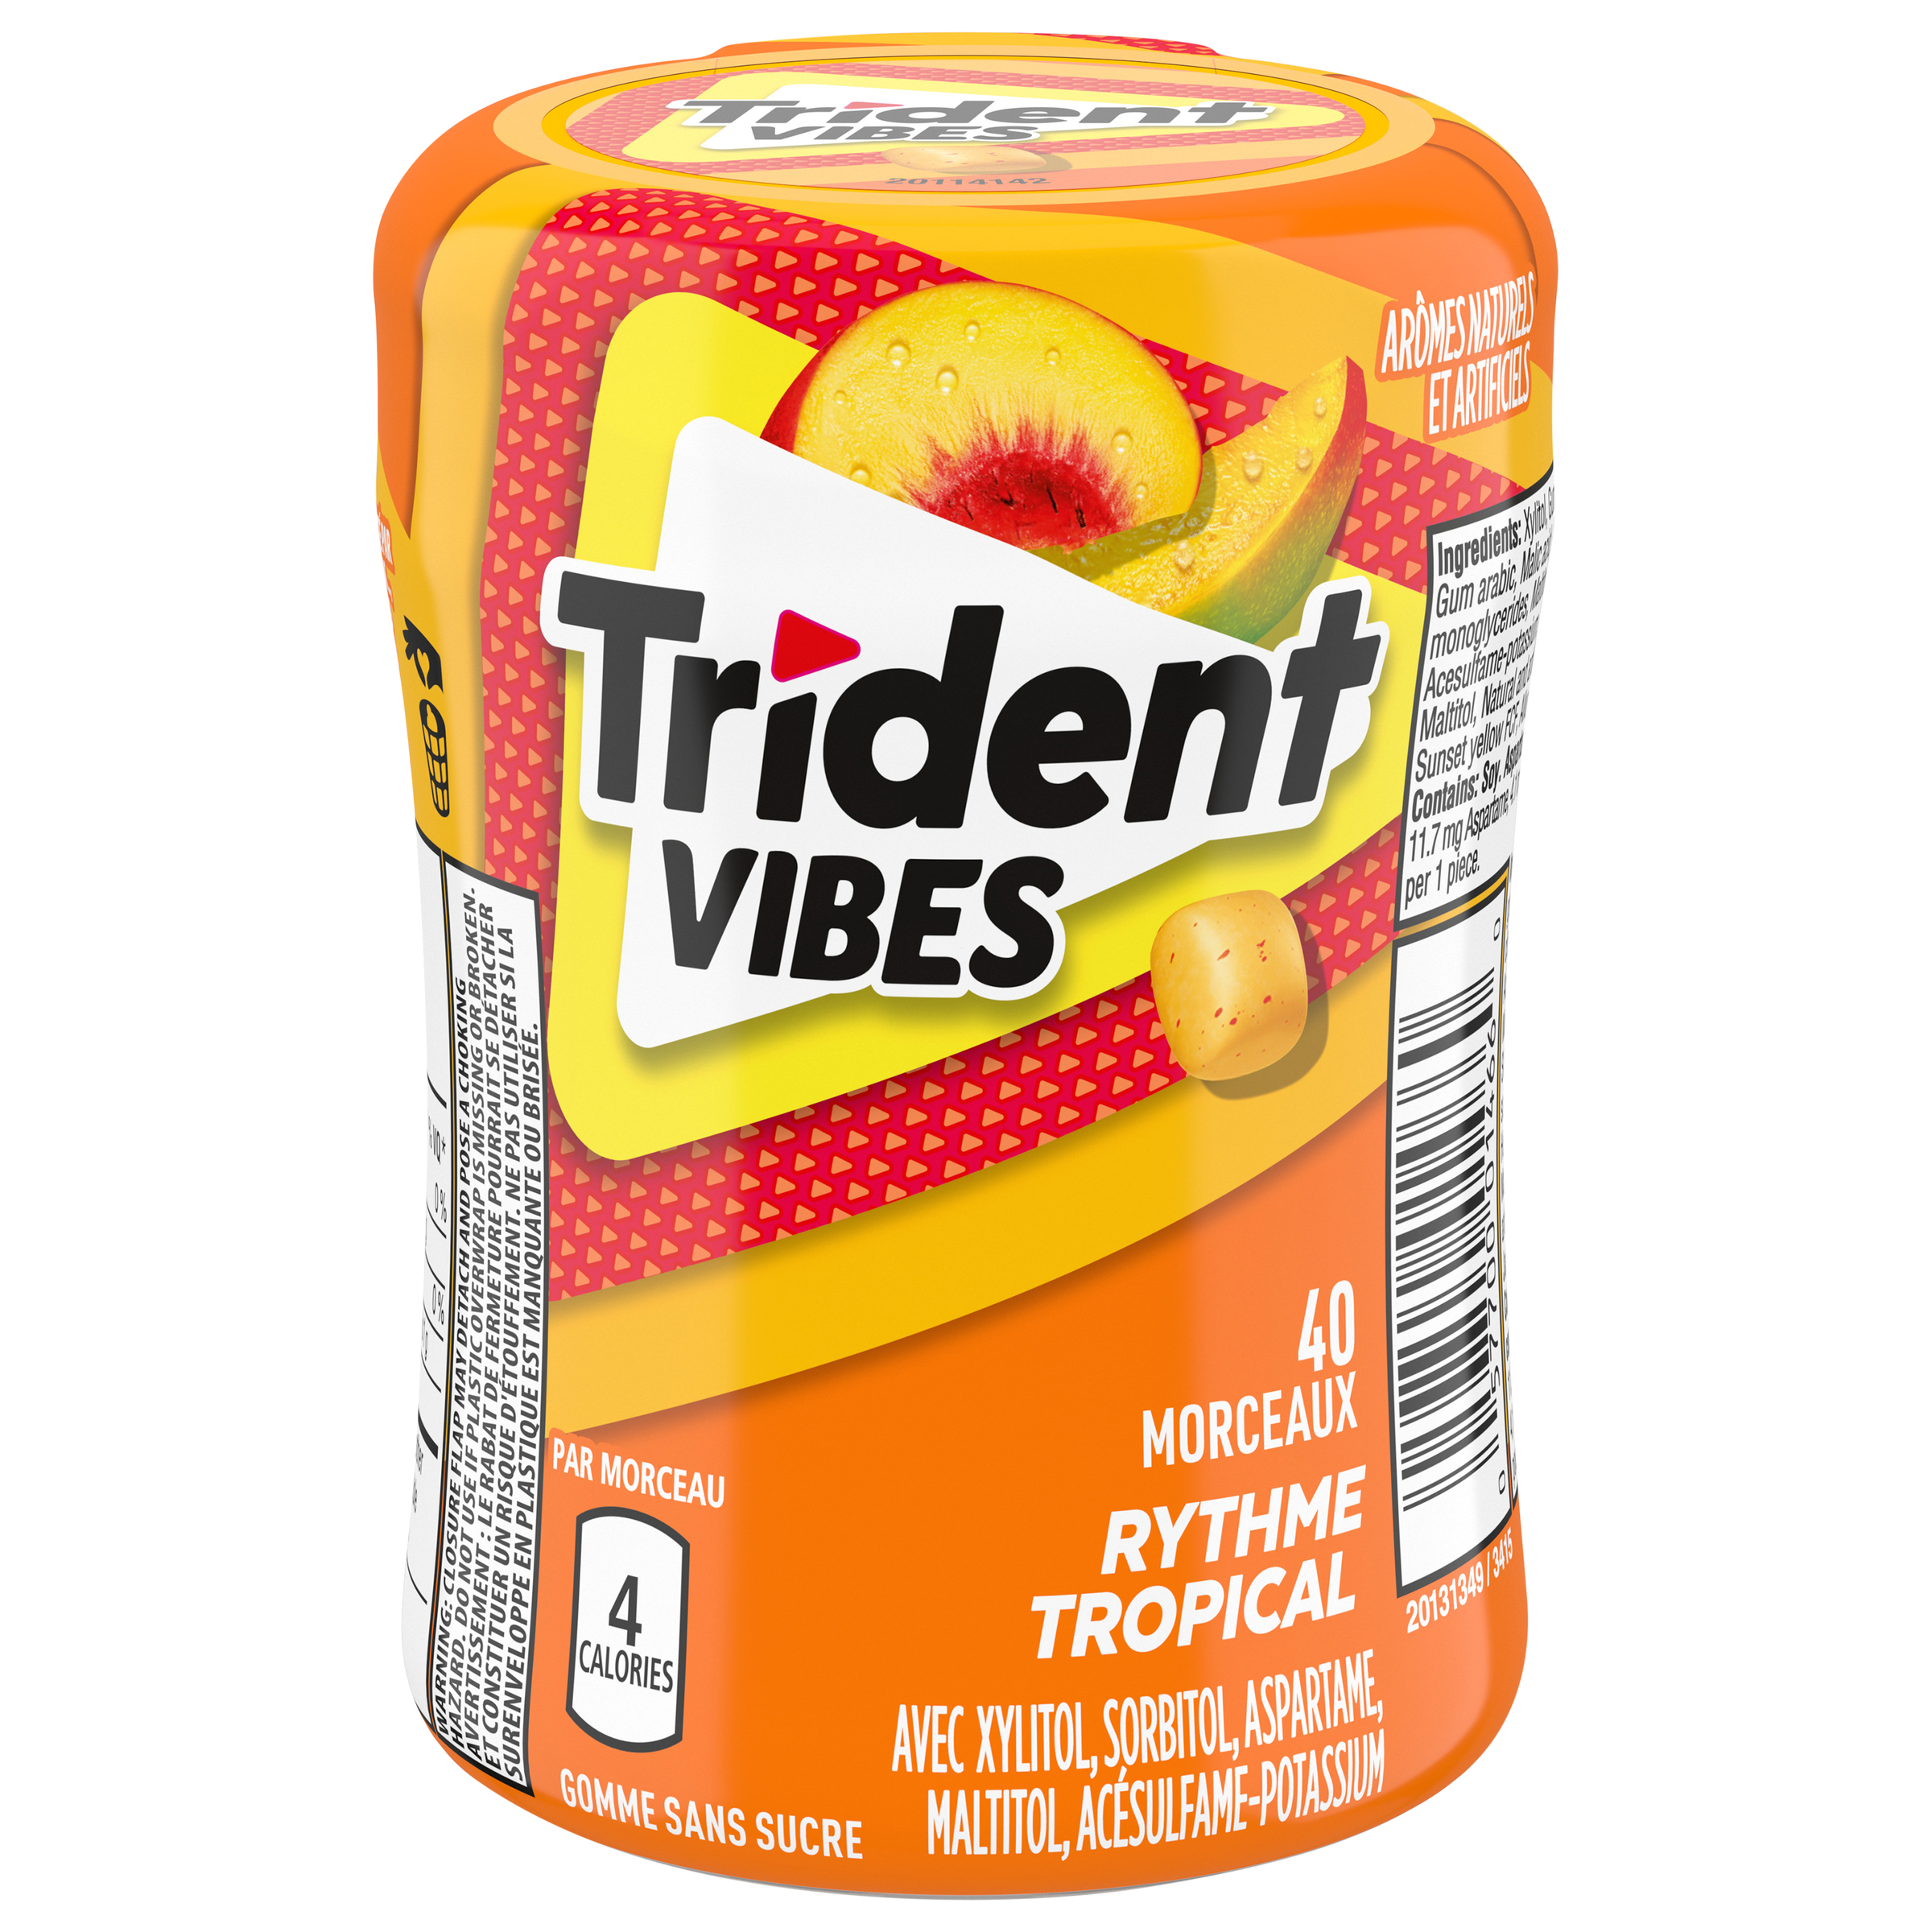 Trident Vibes Sugar Free Gum, Tropical Beat Flavour, 1 Go-Cup (40 Pieces Total)-0